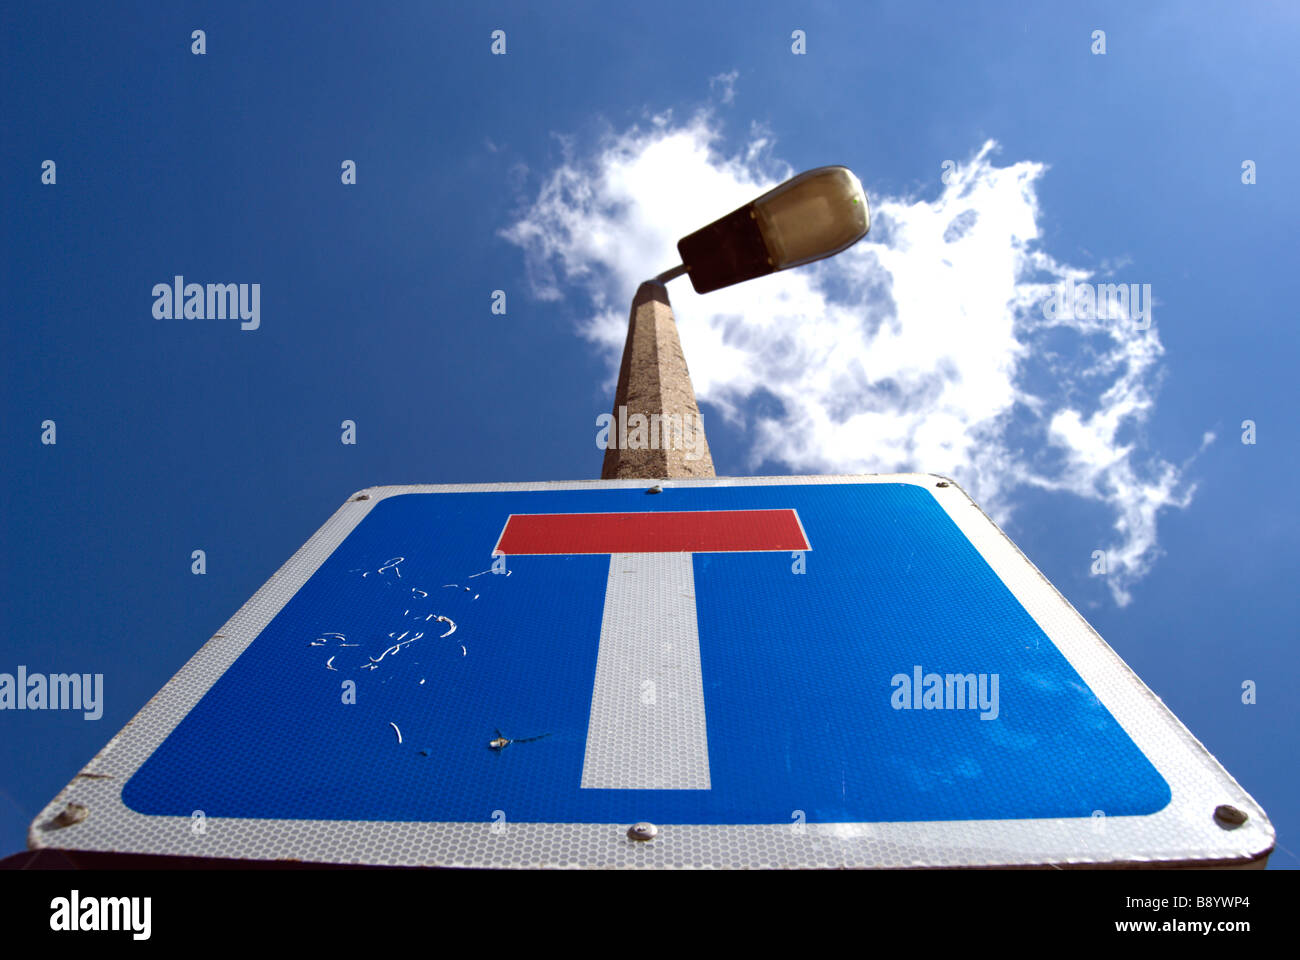 british blue and white road sign indicating a no through road, seen benath a blue sky with a single cloud Stock Photo